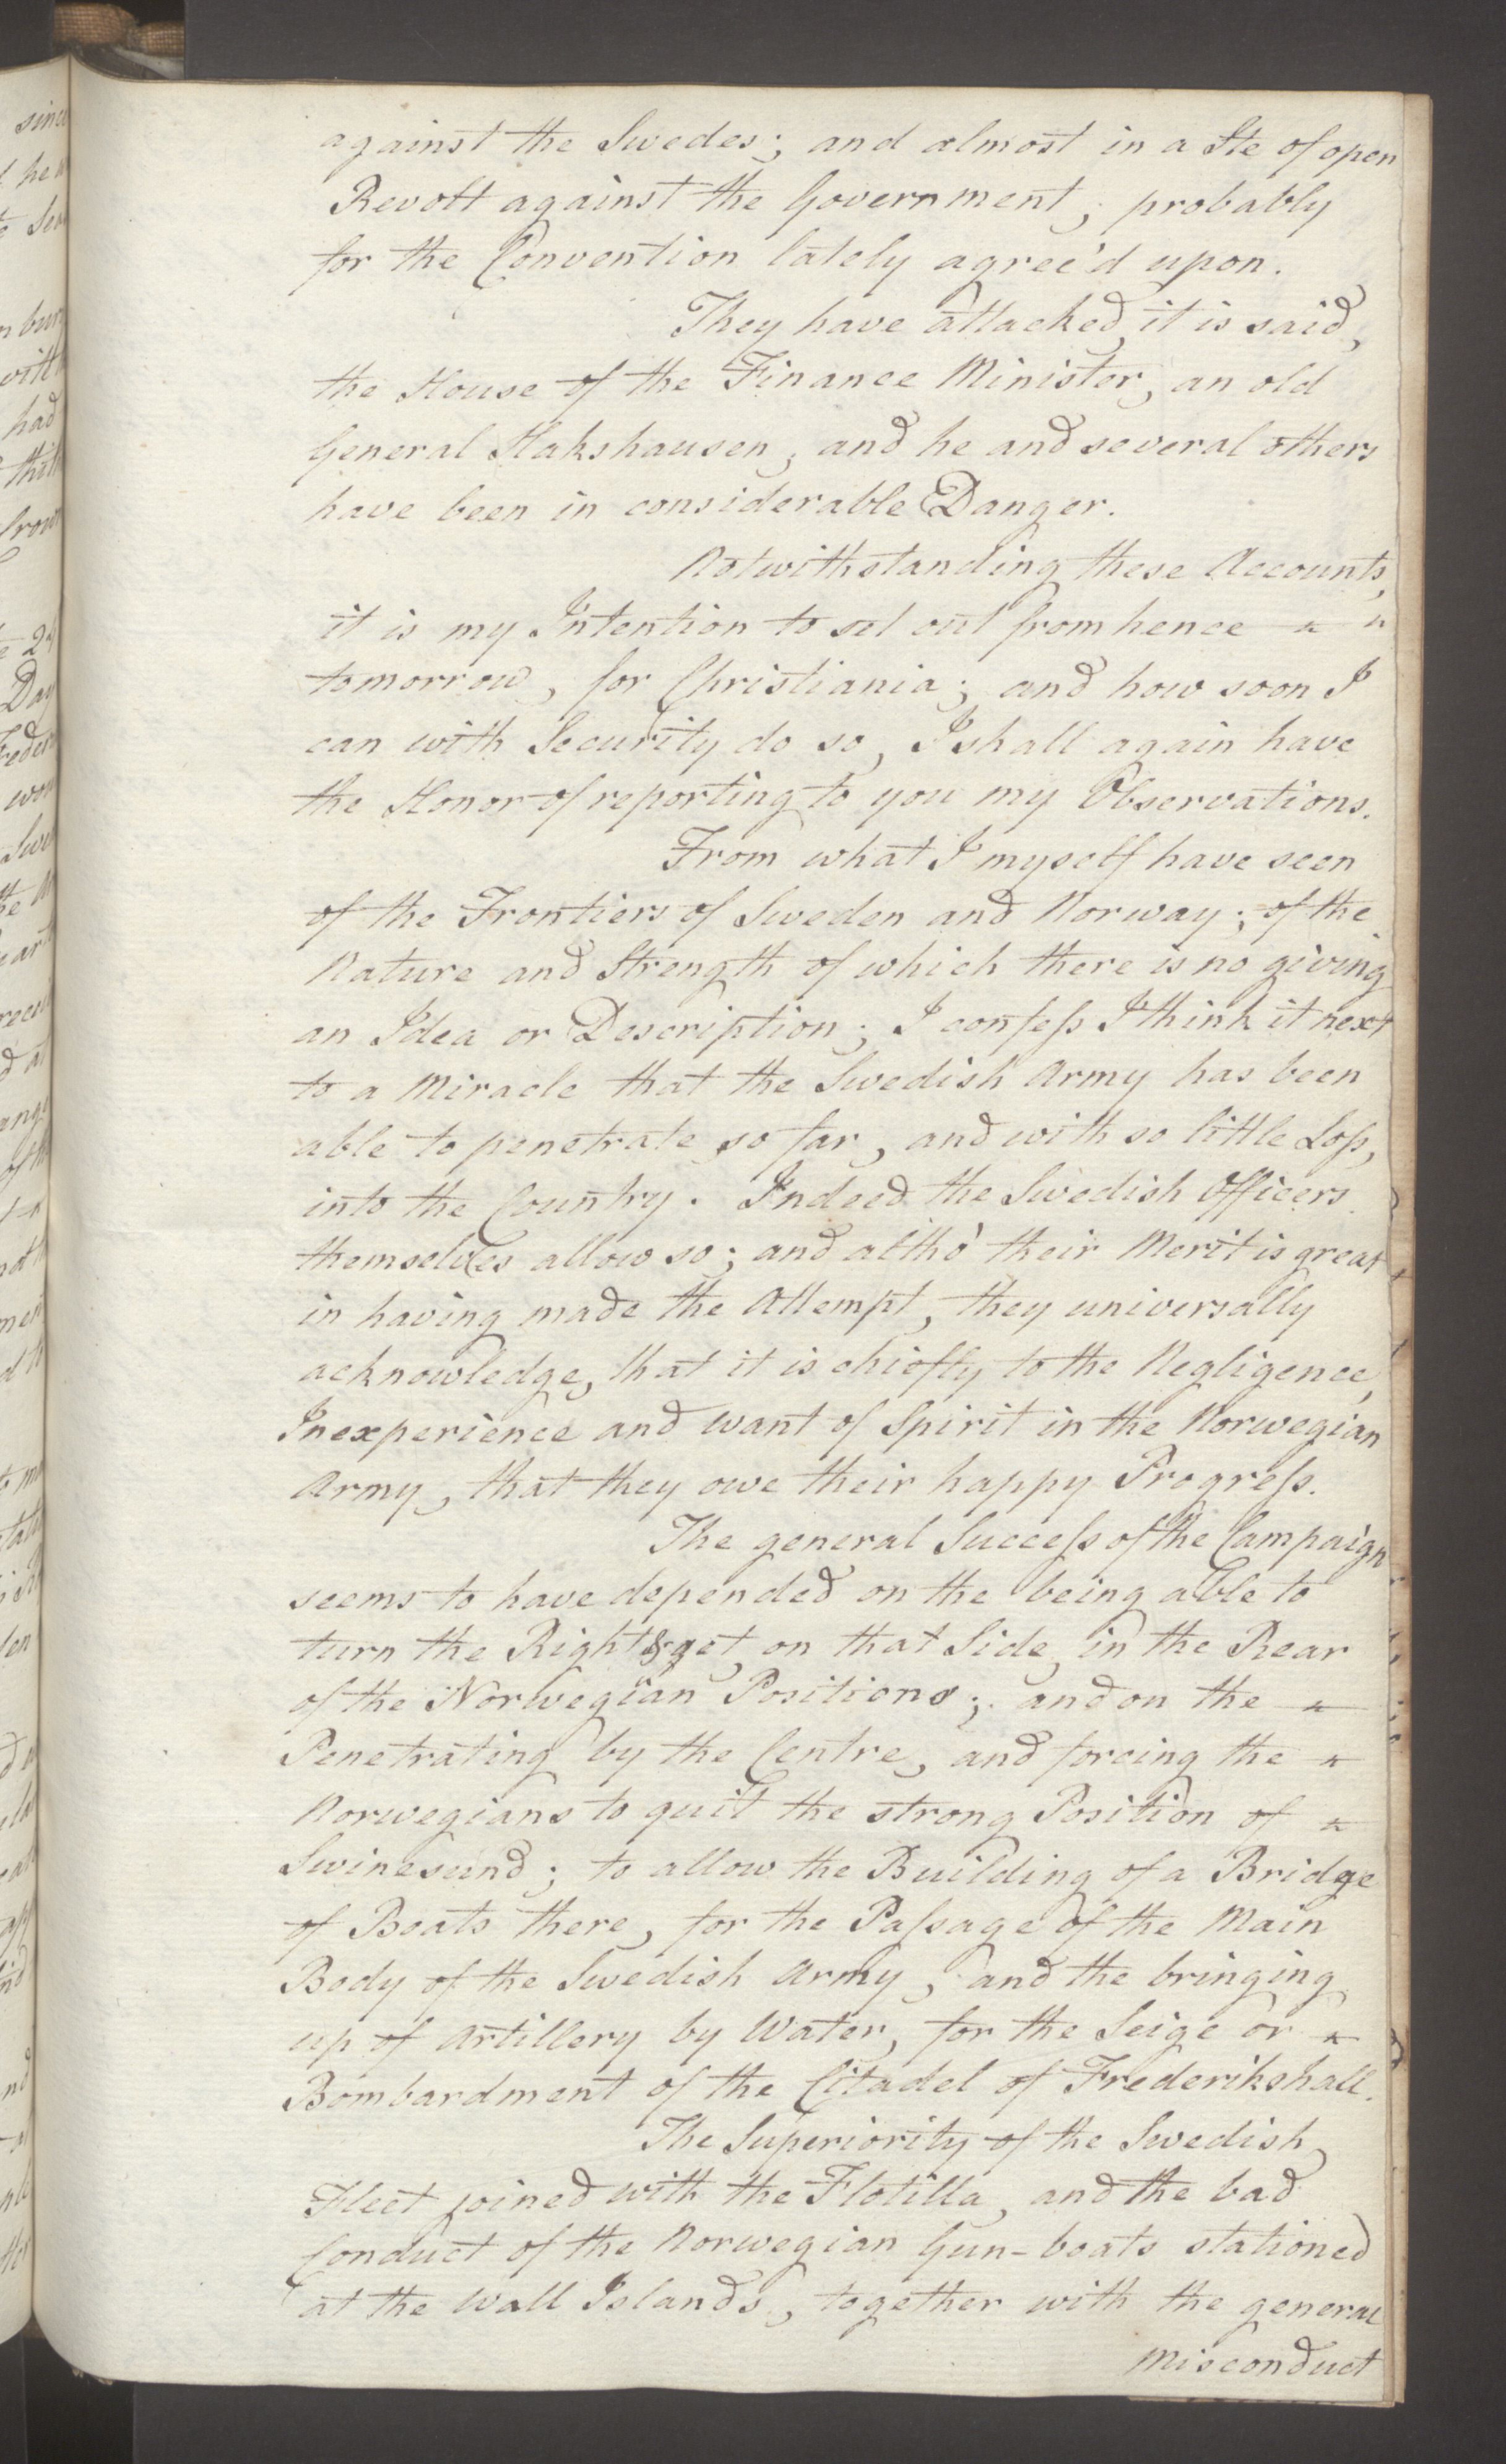 Foreign Office*, UKA/-/FO 38/16: Sir C. Gordon. Reports from Malmö, Jonkoping, and Helsingborg, 1814, s. 97